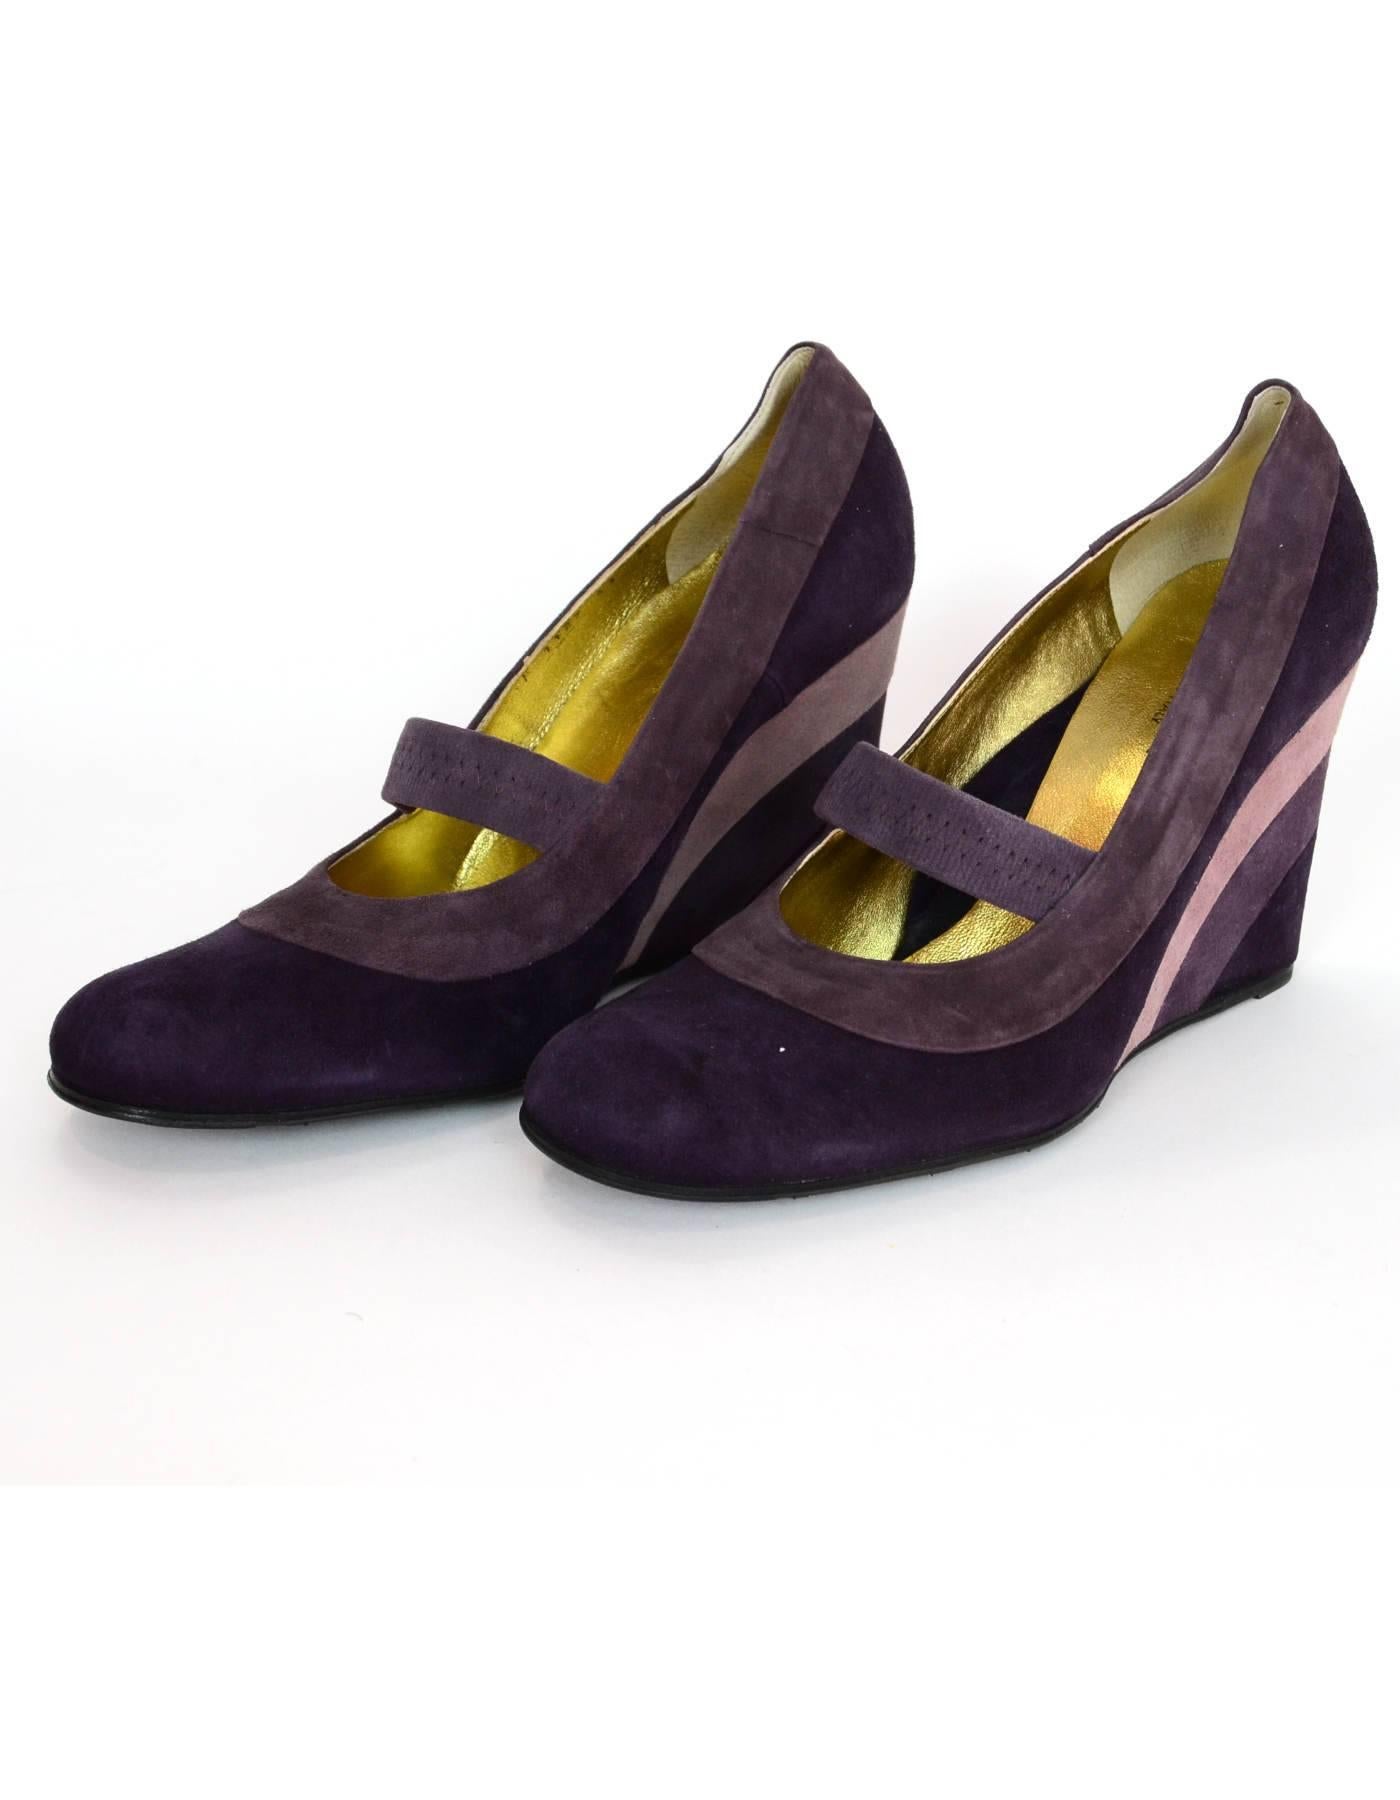 Taryn Rose Purple Tri-Color Suede Mary Jane Wedges Sz 41 NIB

Made In: Italy
Color: Purple
Materials: Suede
Closure/Opening: Slide on
Sole Stamp: Taryn Rose vero cuoio Made in Italy 41
Overall Condition: Excellent pre-owned condition
Included: Taryn